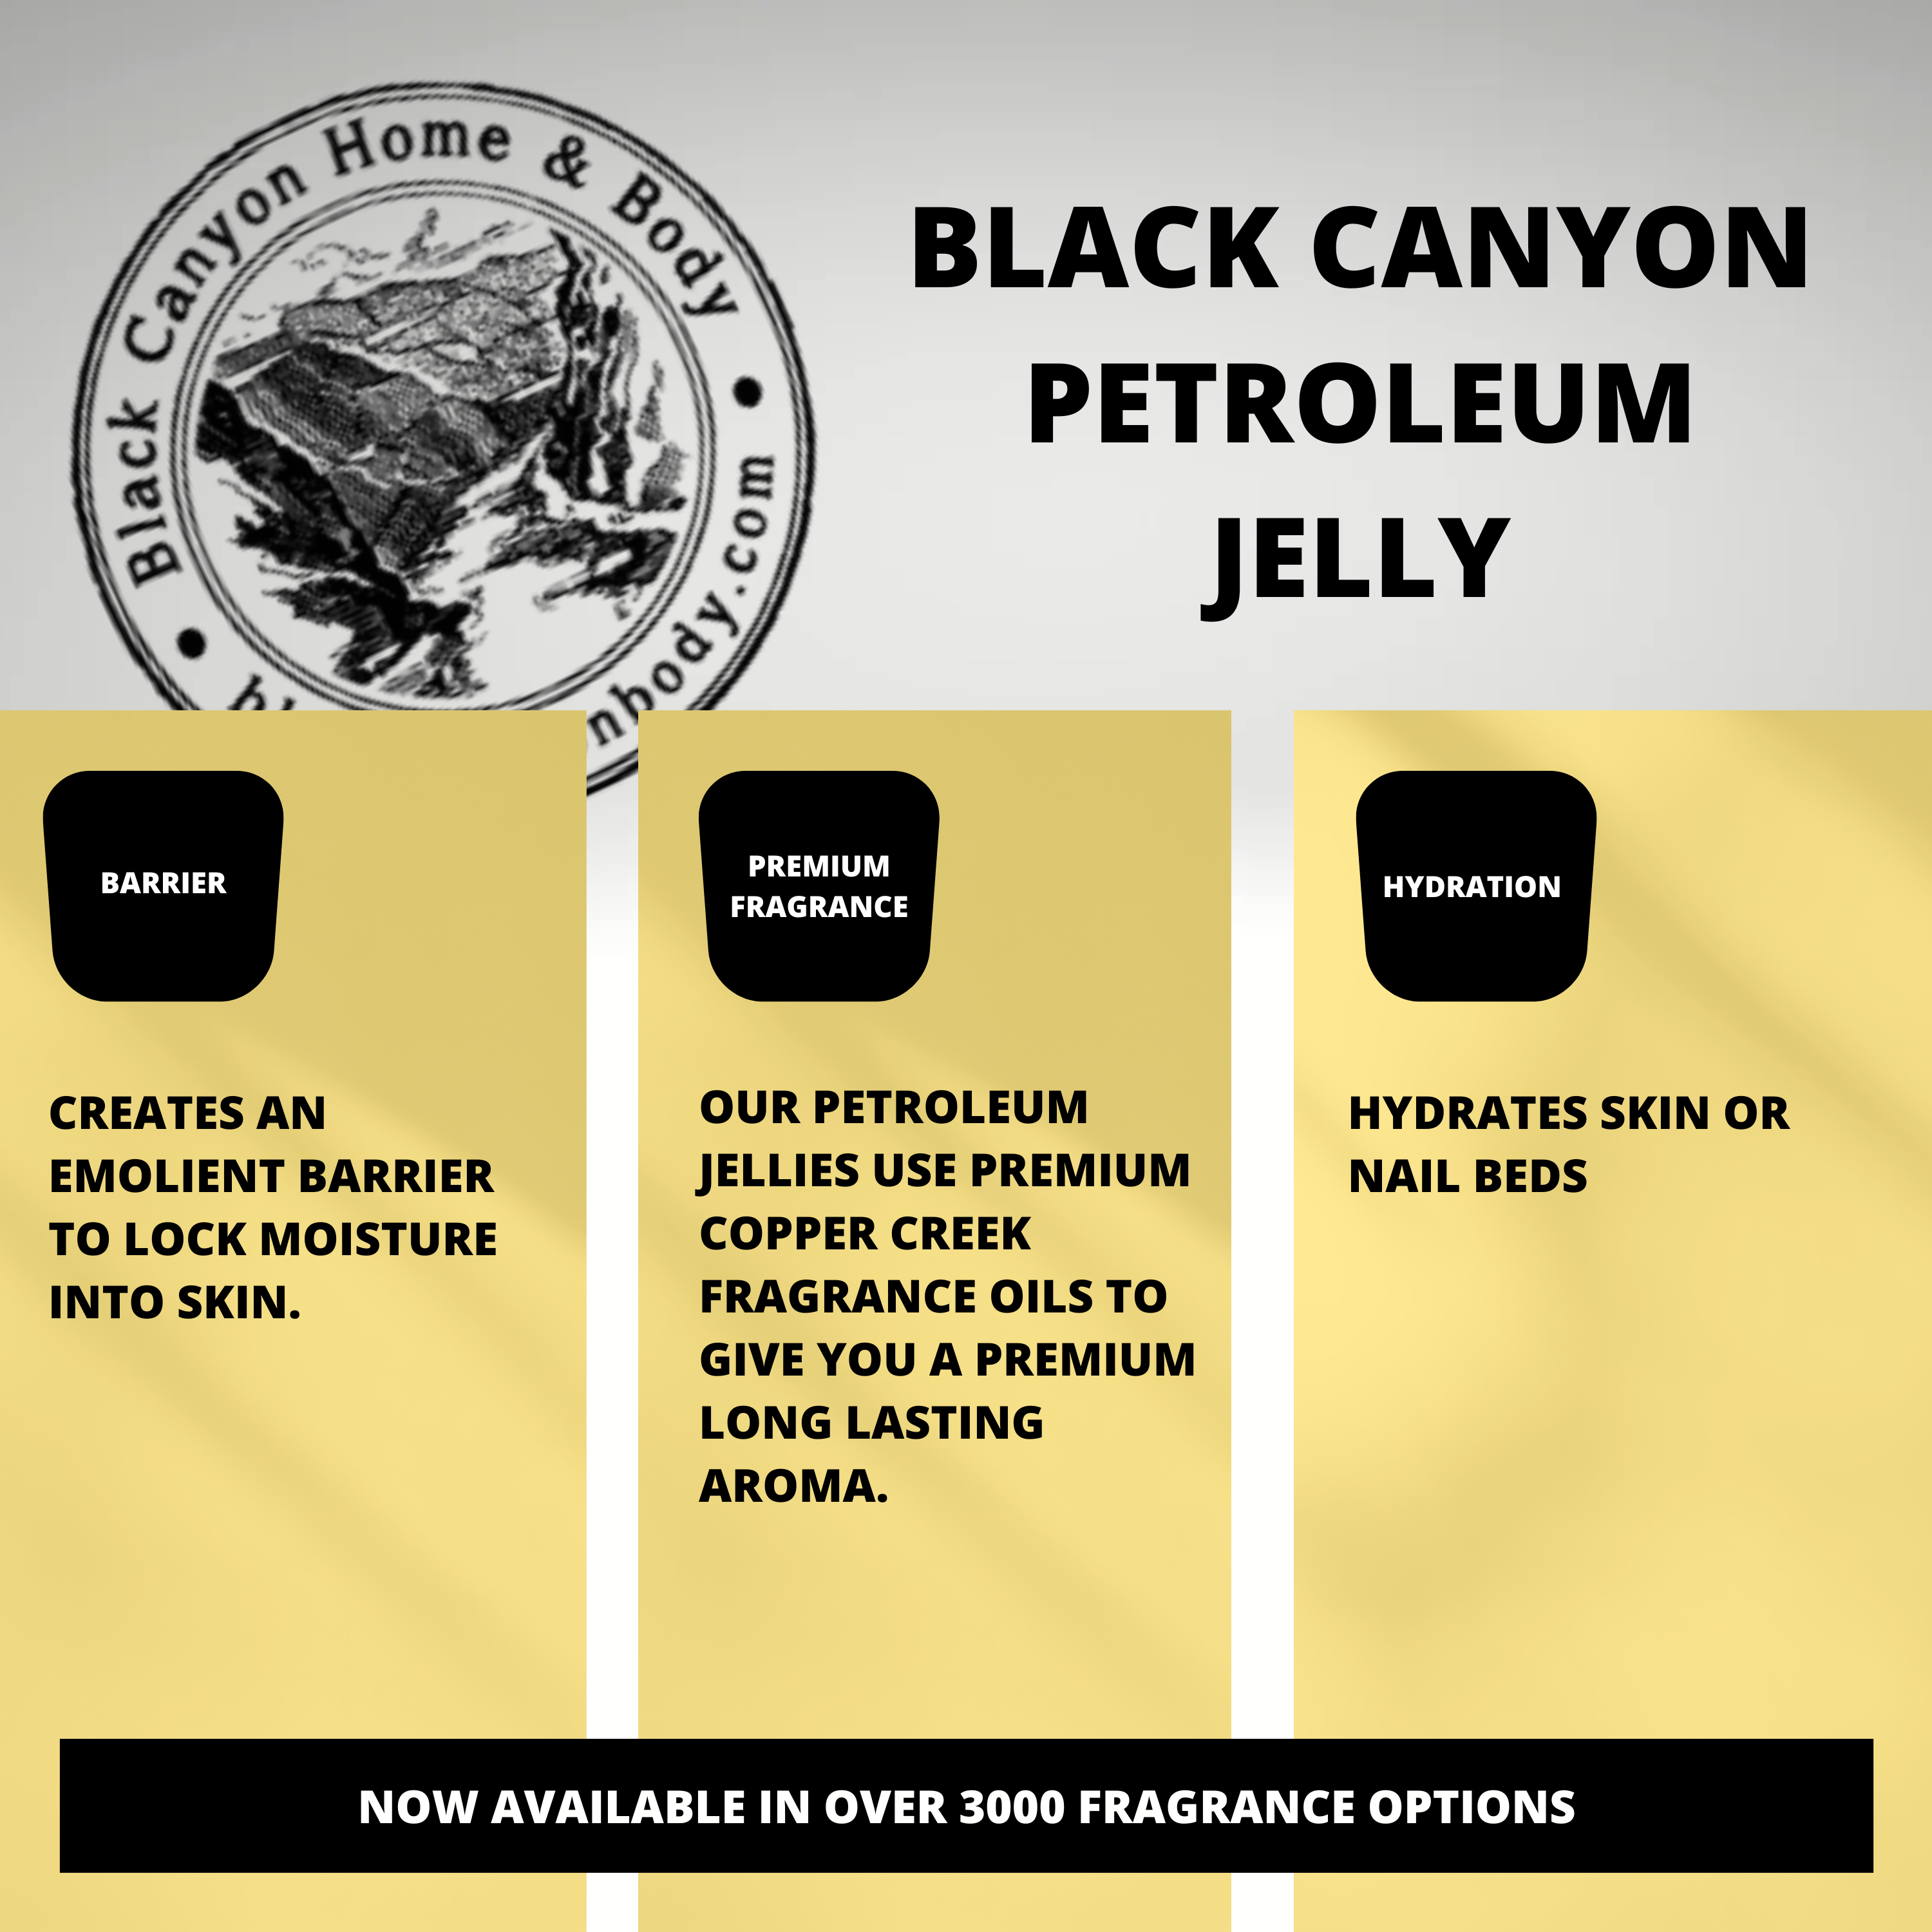 Black Canyon English Toffee Scented Petroleum Jelly